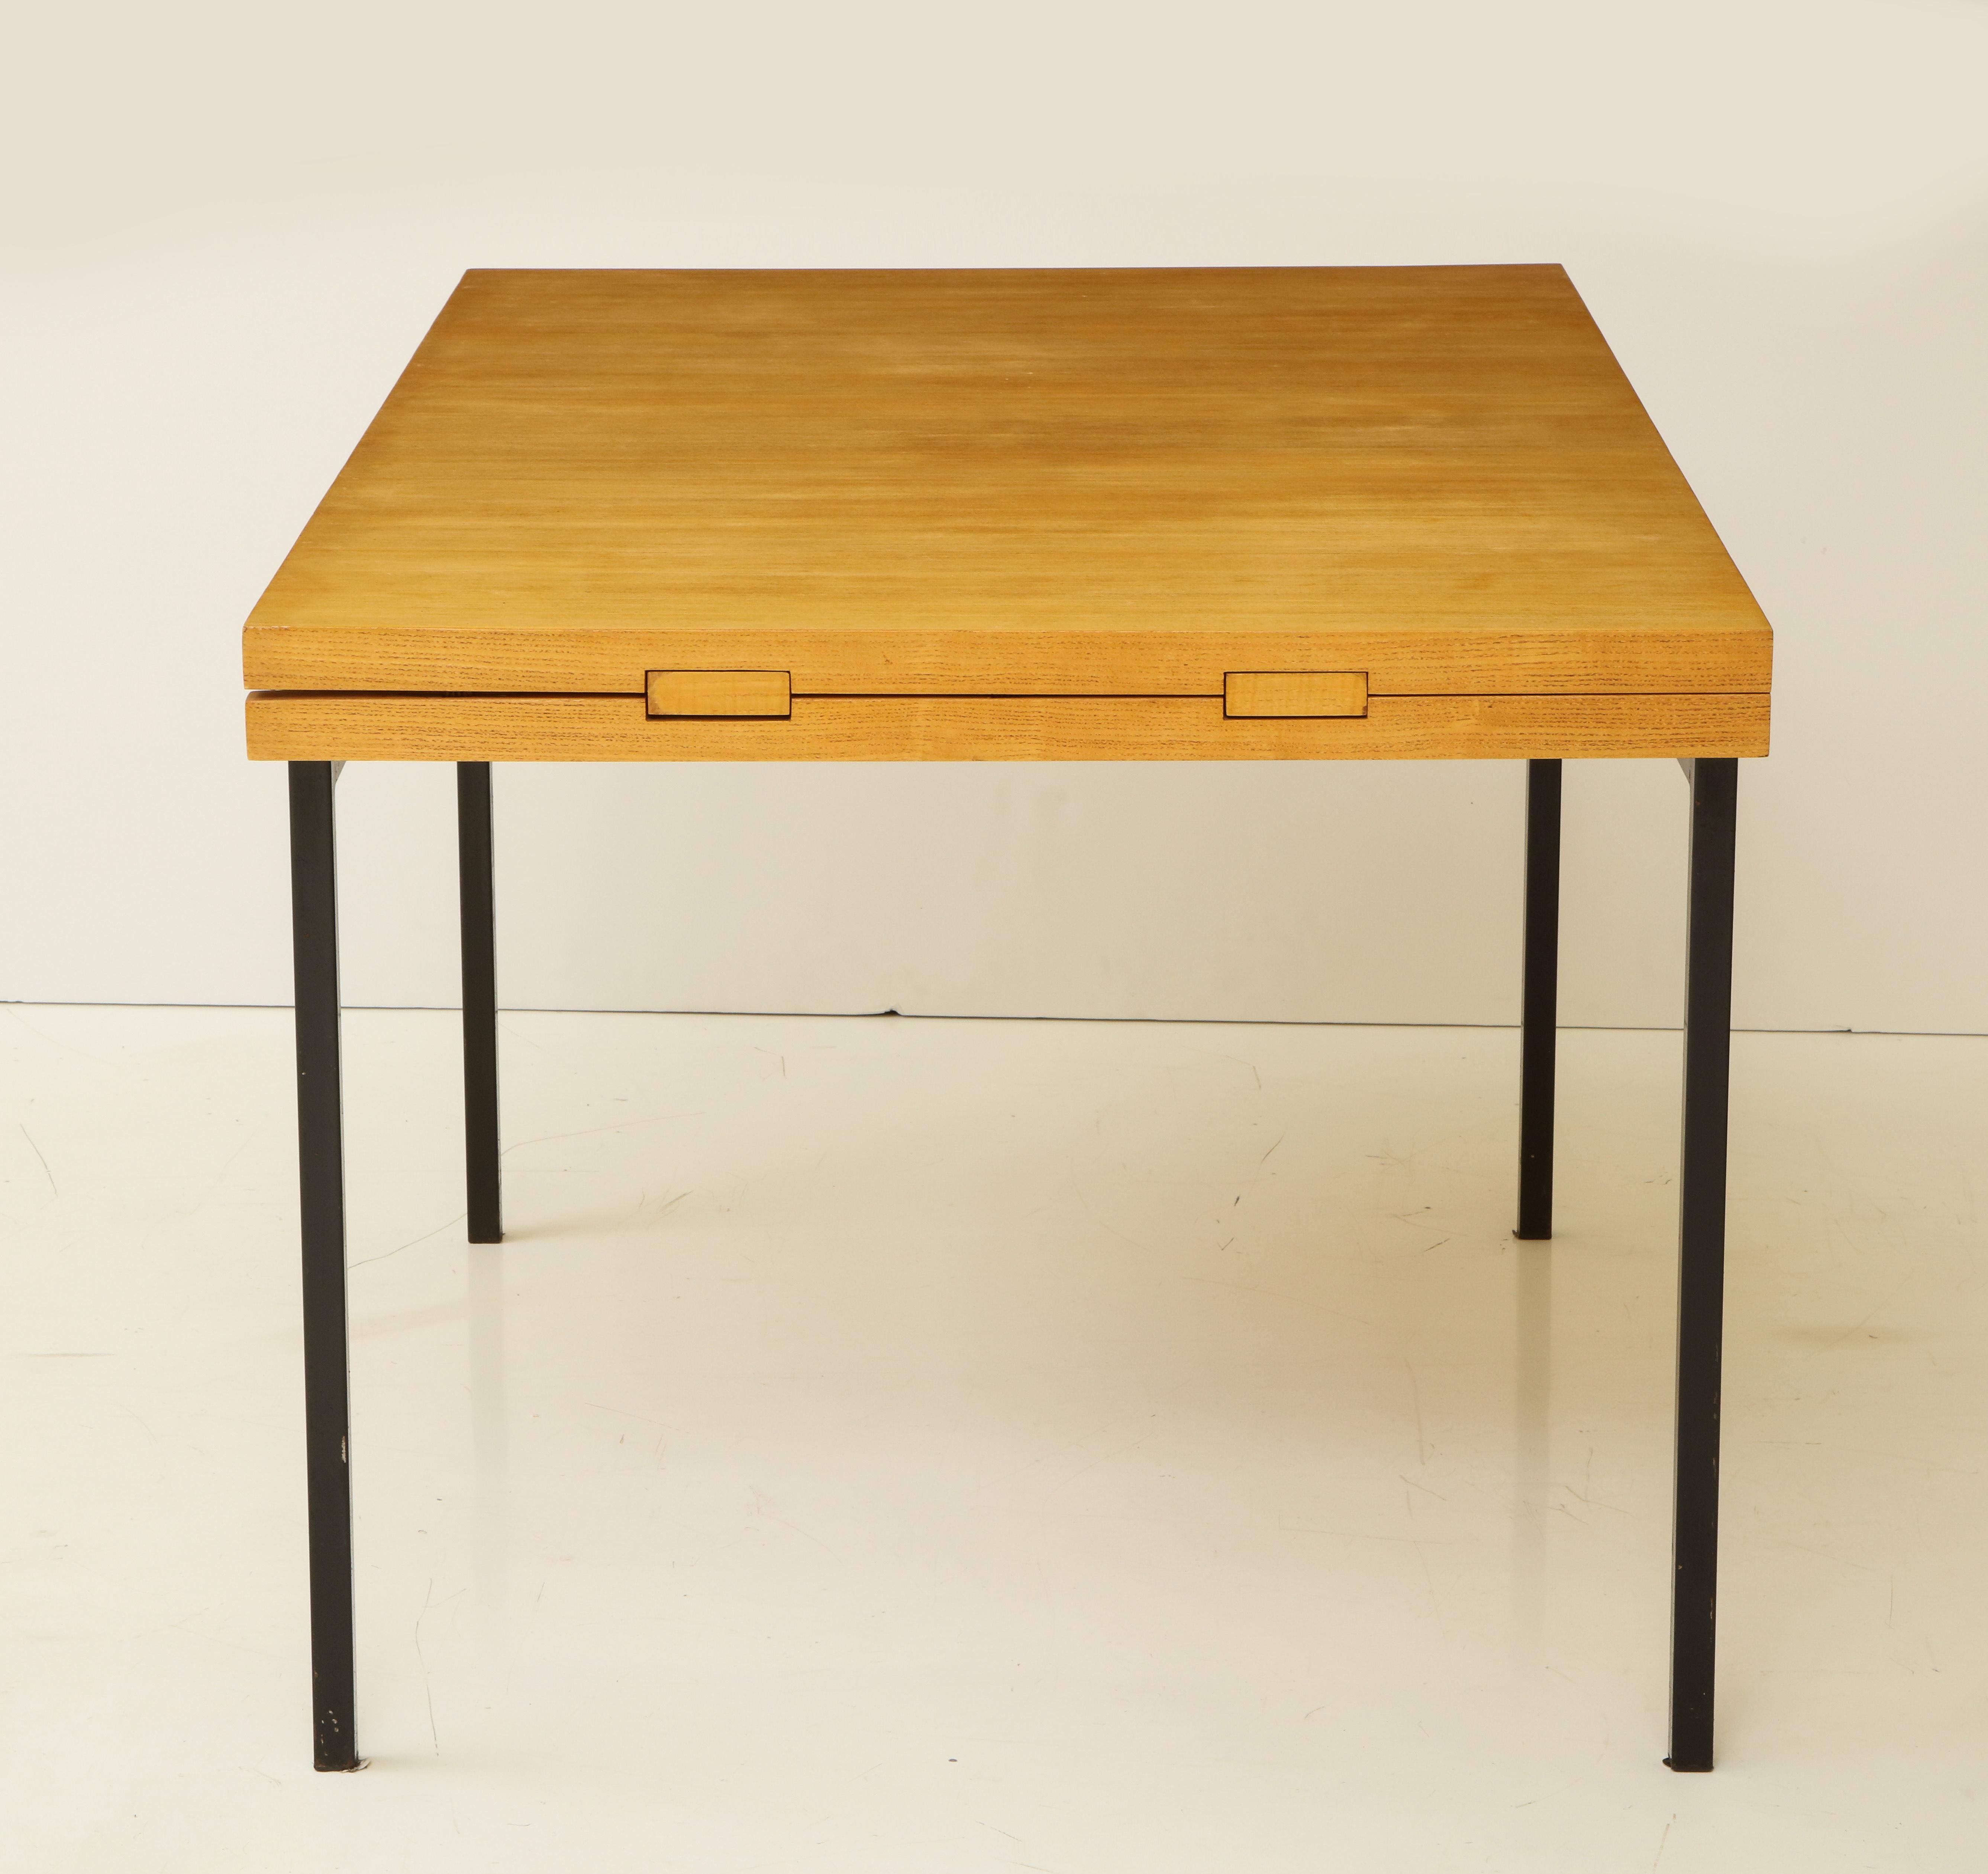 Enameled Rare Expandable Dining Room Table by Pierre Guariche and Arp, France, 1960s For Sale